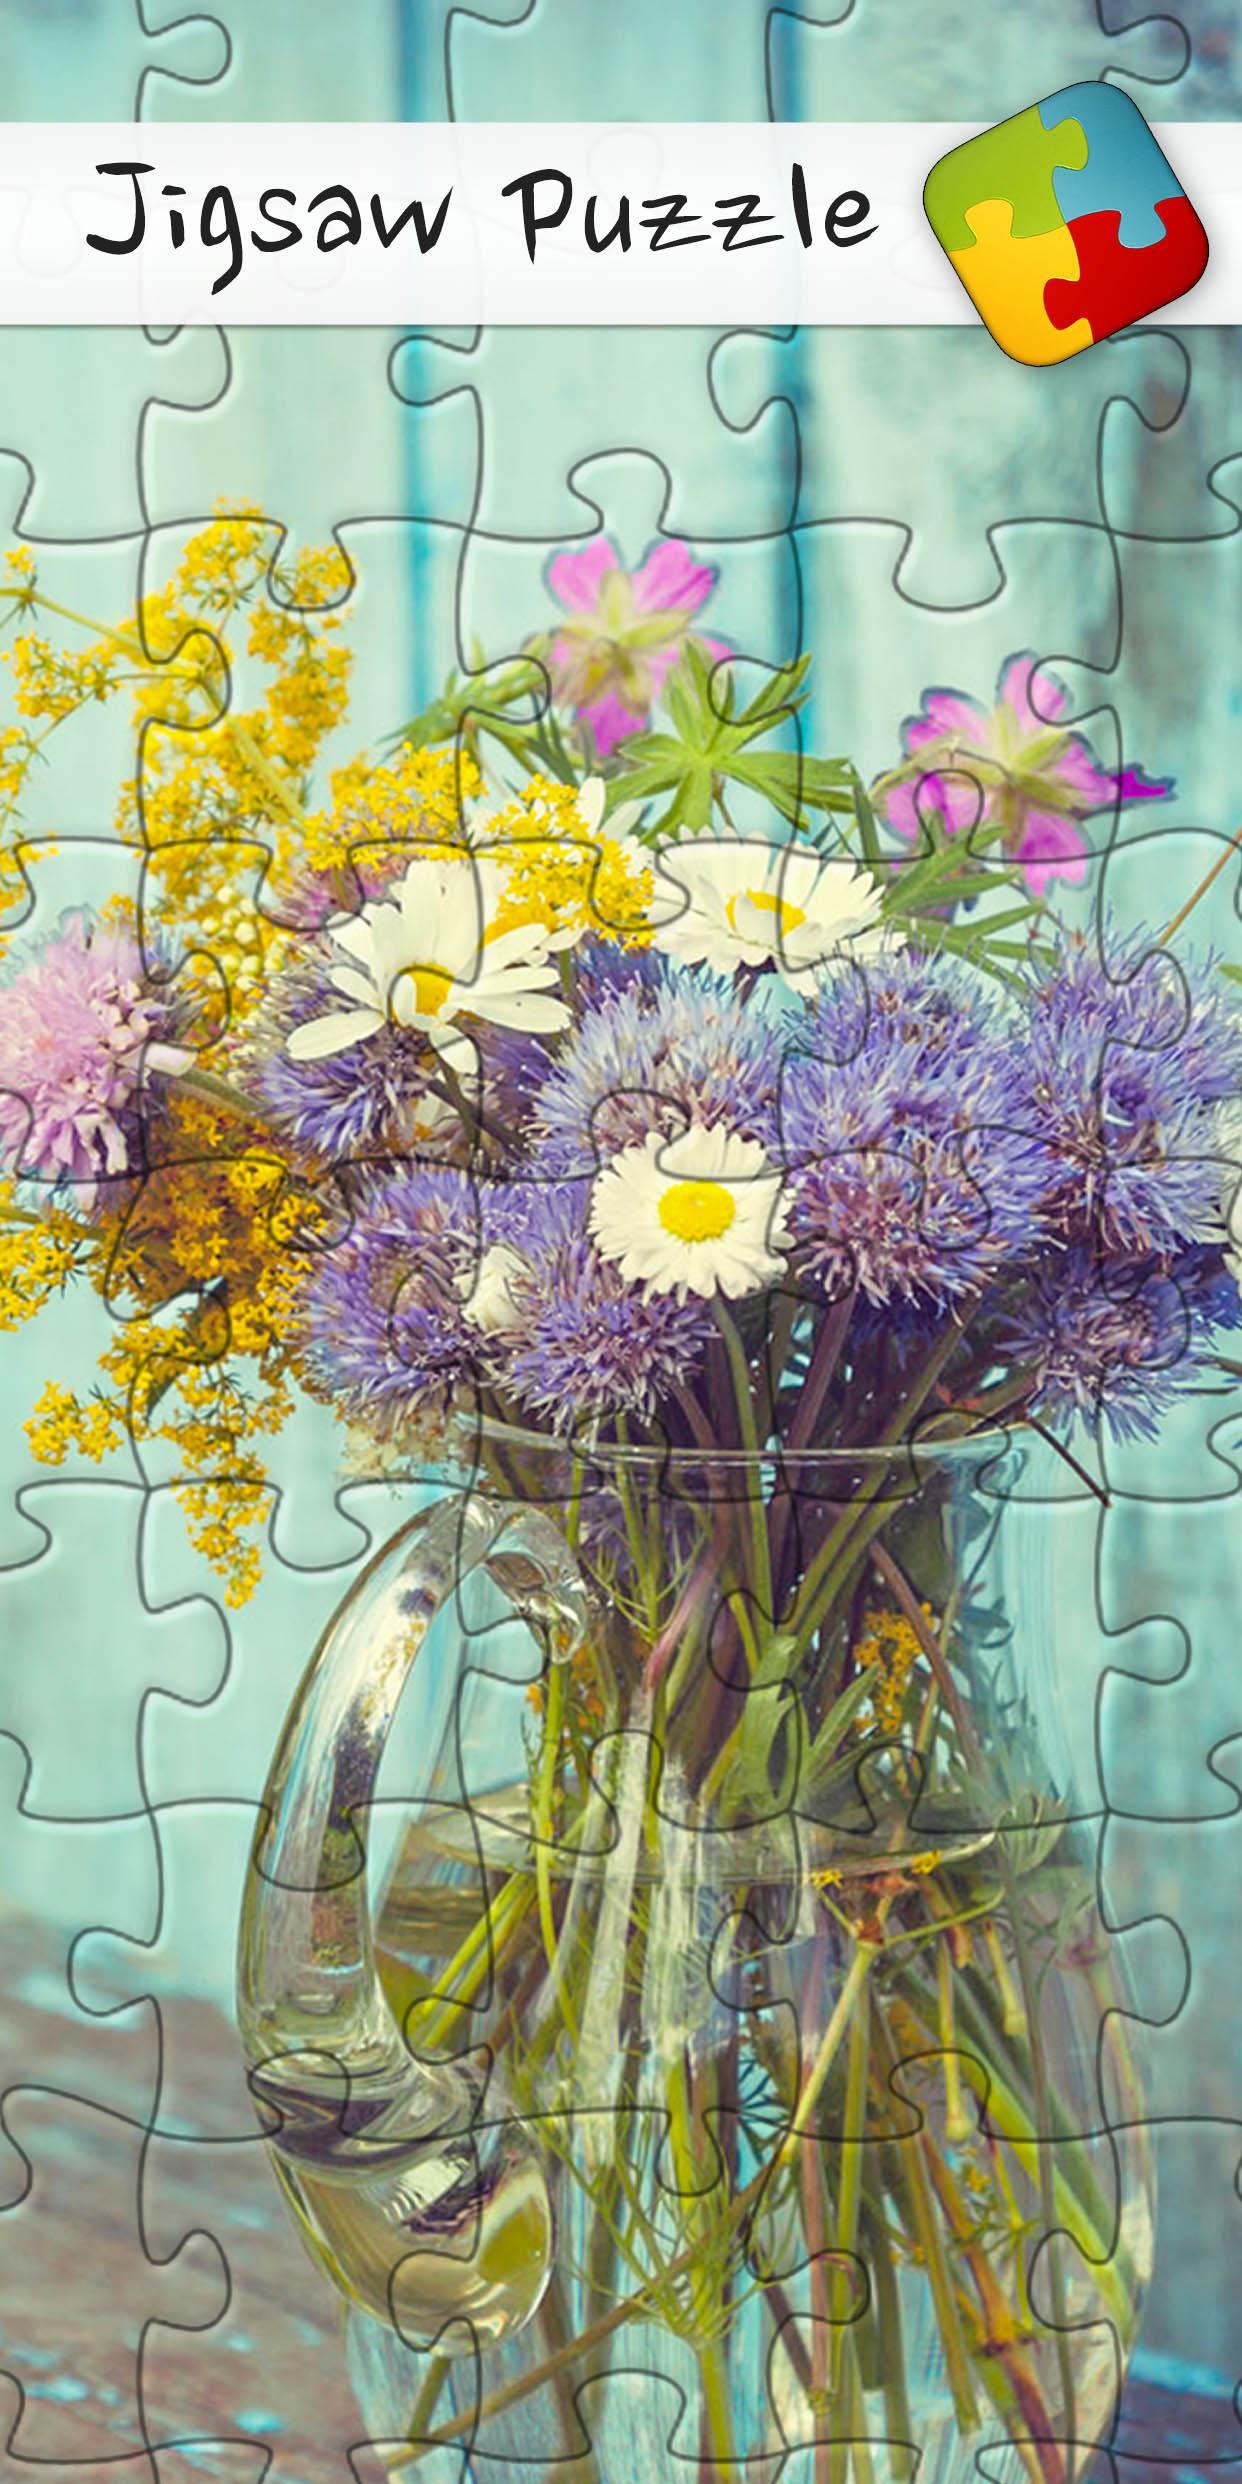 Jigsaw Puzzle HD play best free family games 5.6 Screenshot 1